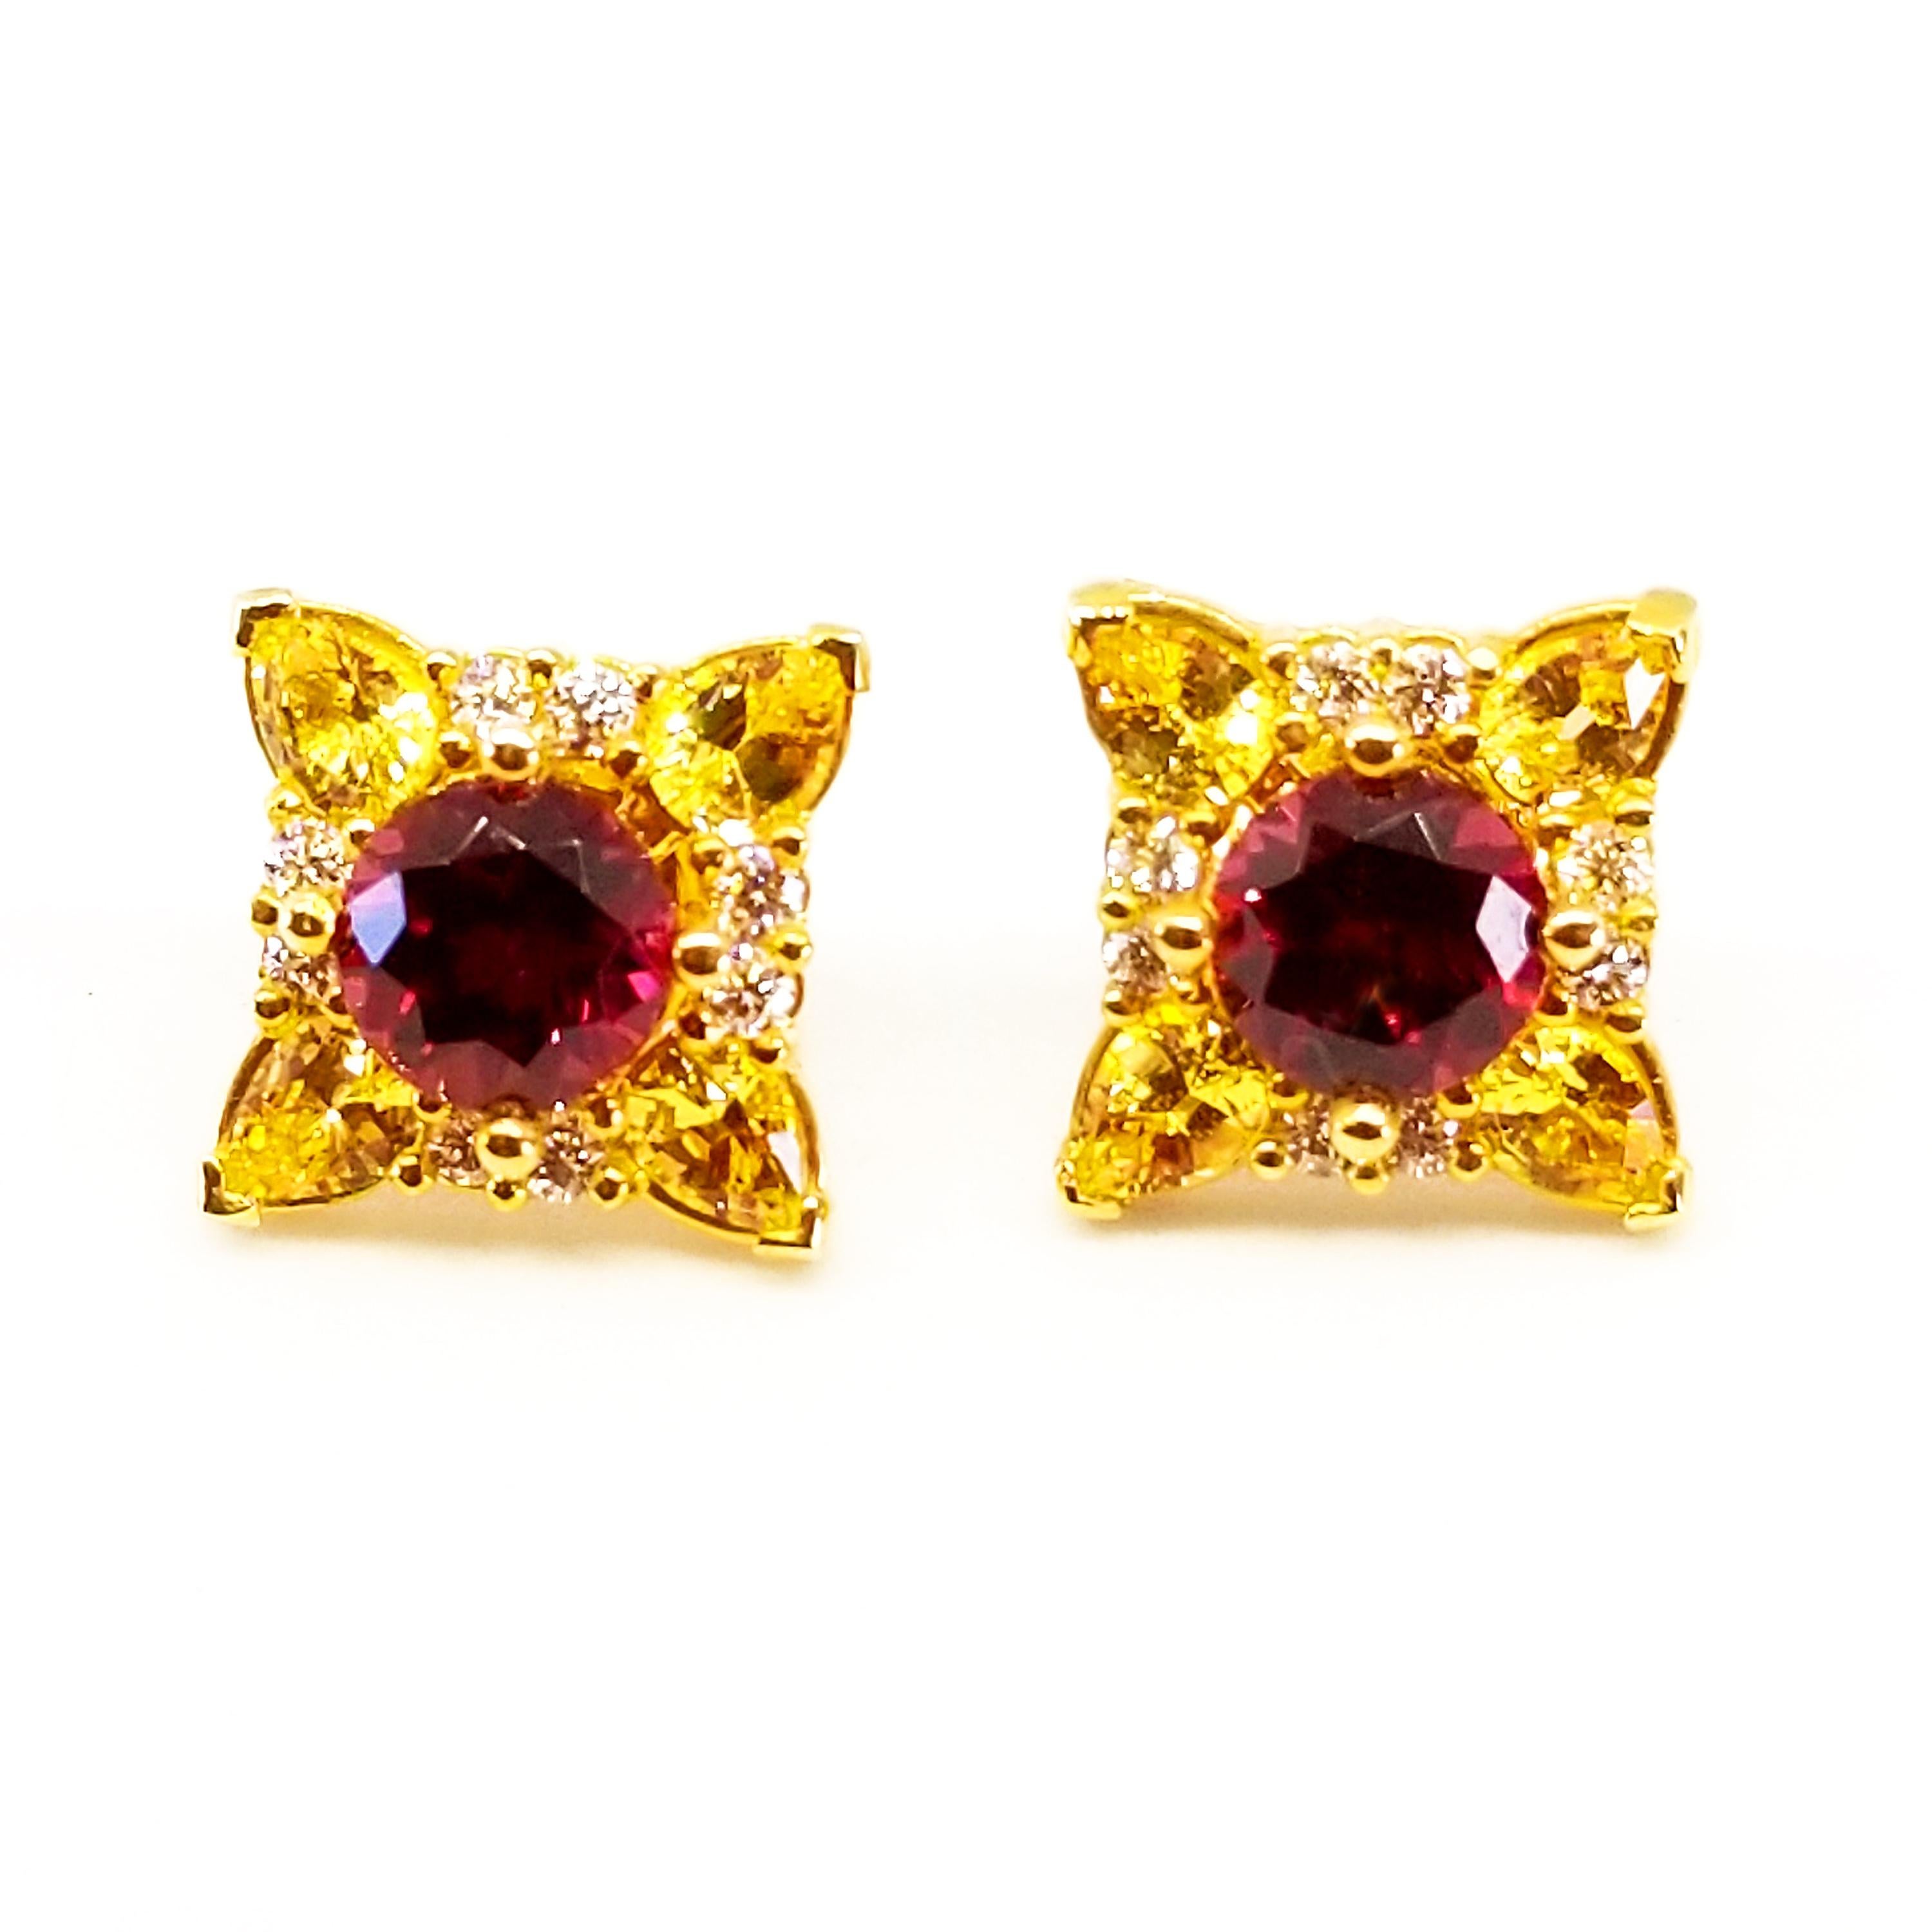 This Colorful pair of Cluster Floret Earrings in Deep Red and Yellow feature Round Brilliant cut, natural  Rhodolite Garnets of 6mm each and 2.20 Carats combined weight. The Gem Quality stones are of vibrant Red hue and are prong set. Surrounding